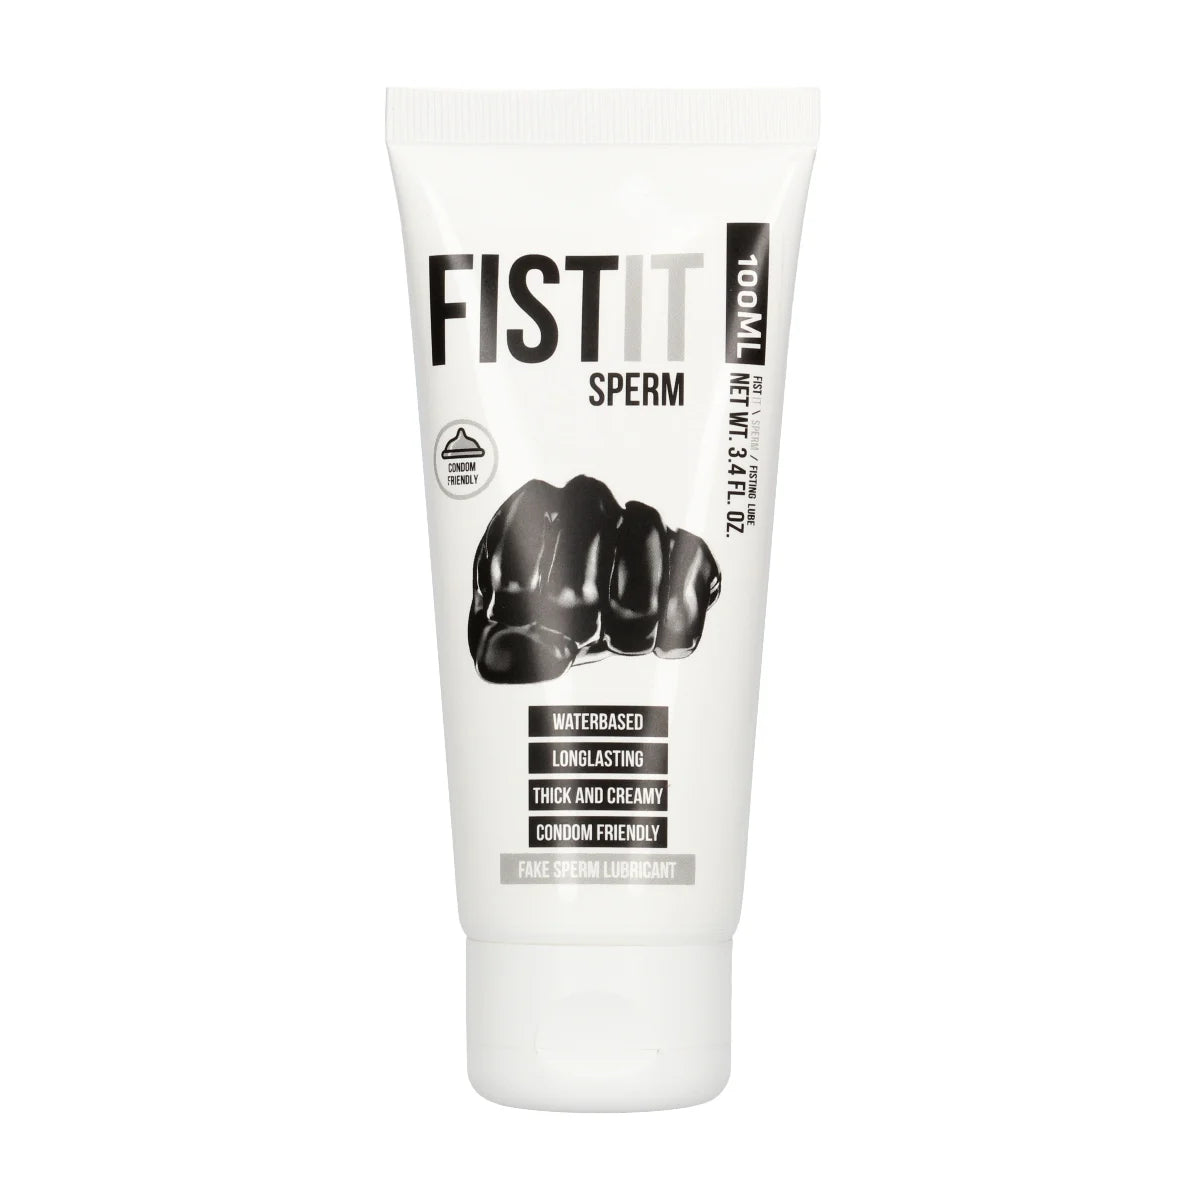 Fist It Submerge Oil Based Lubricant 500ml (8212600258799)